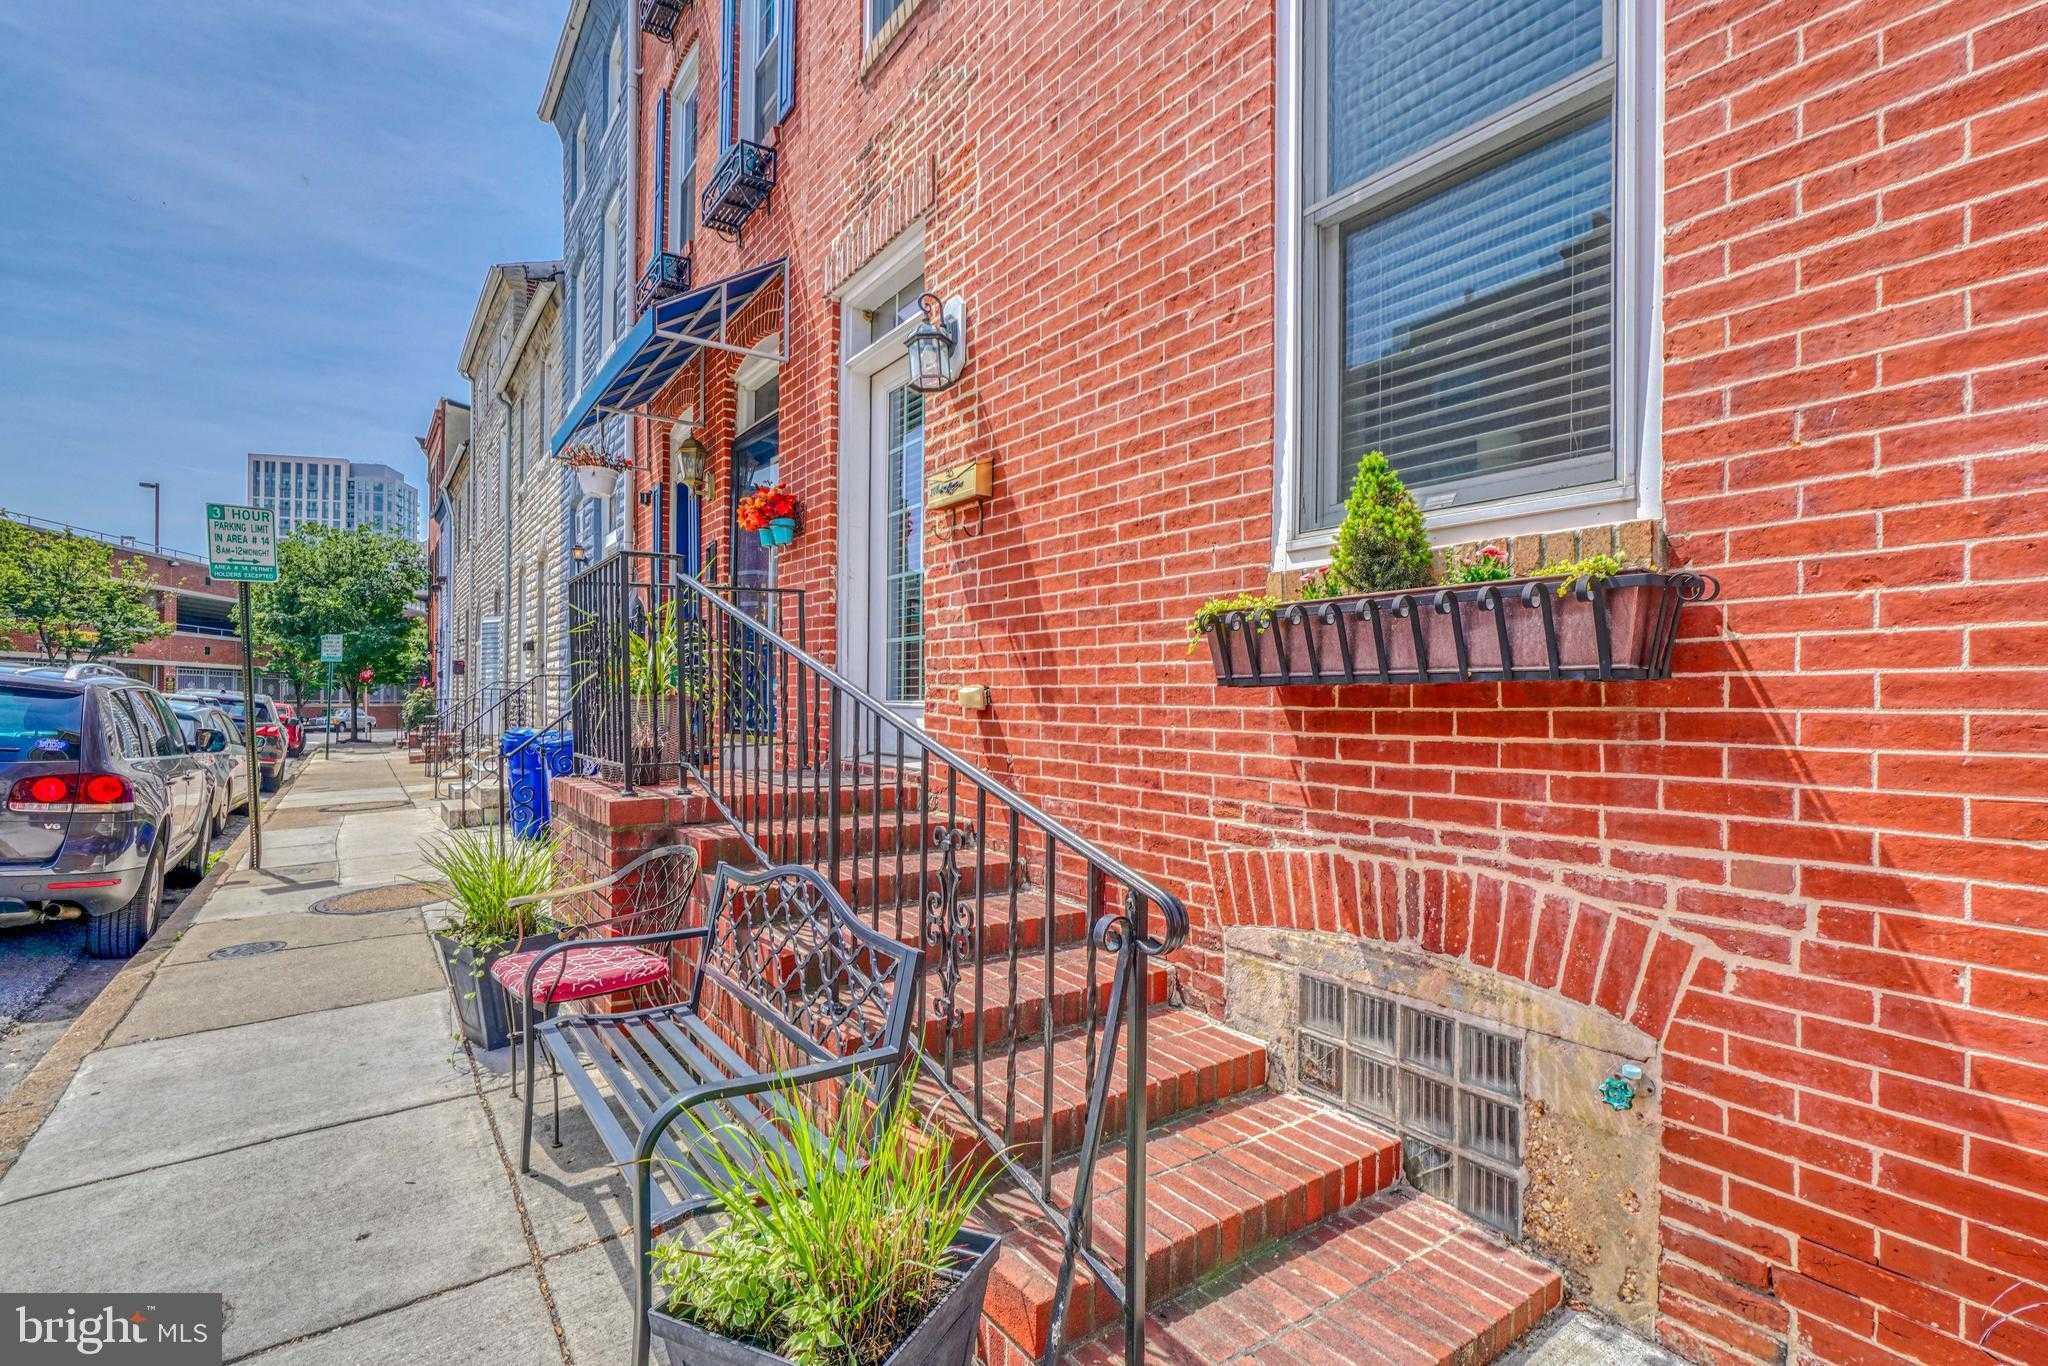 View BALTIMORE, MD 21202 townhome